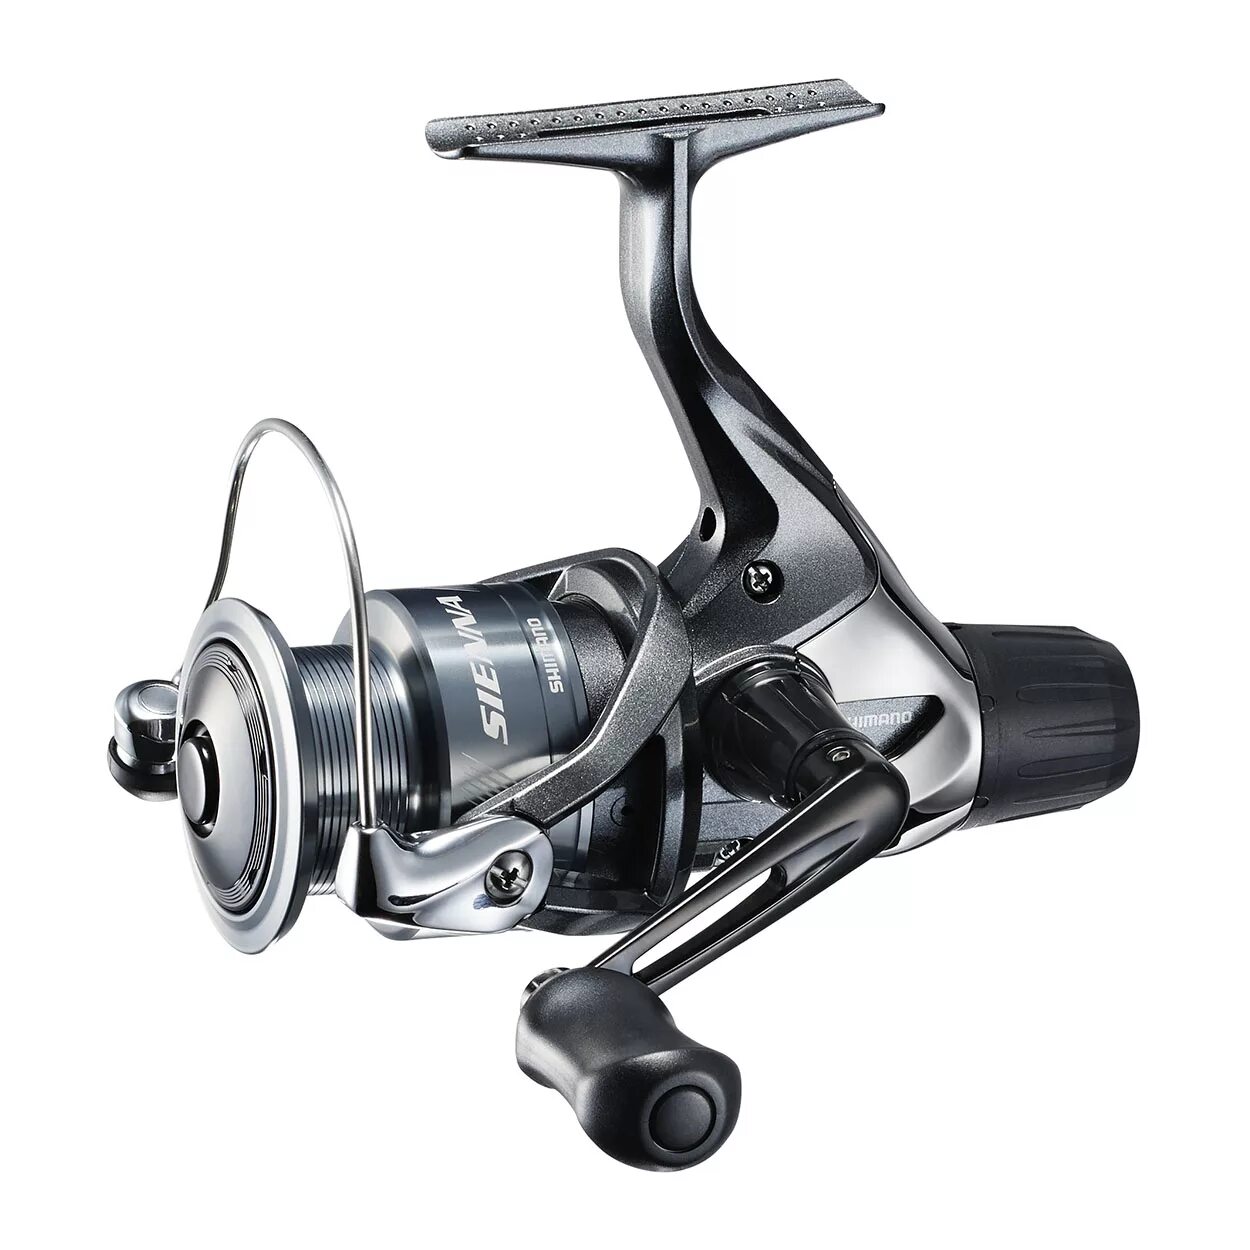 Re spin. Катушка Shimano Sienna 2500 re. Shimano Sienna 4000 re. Катушка Shimano Sienna 4000 FG. Катушка Shimano Sienna 1000 FG.